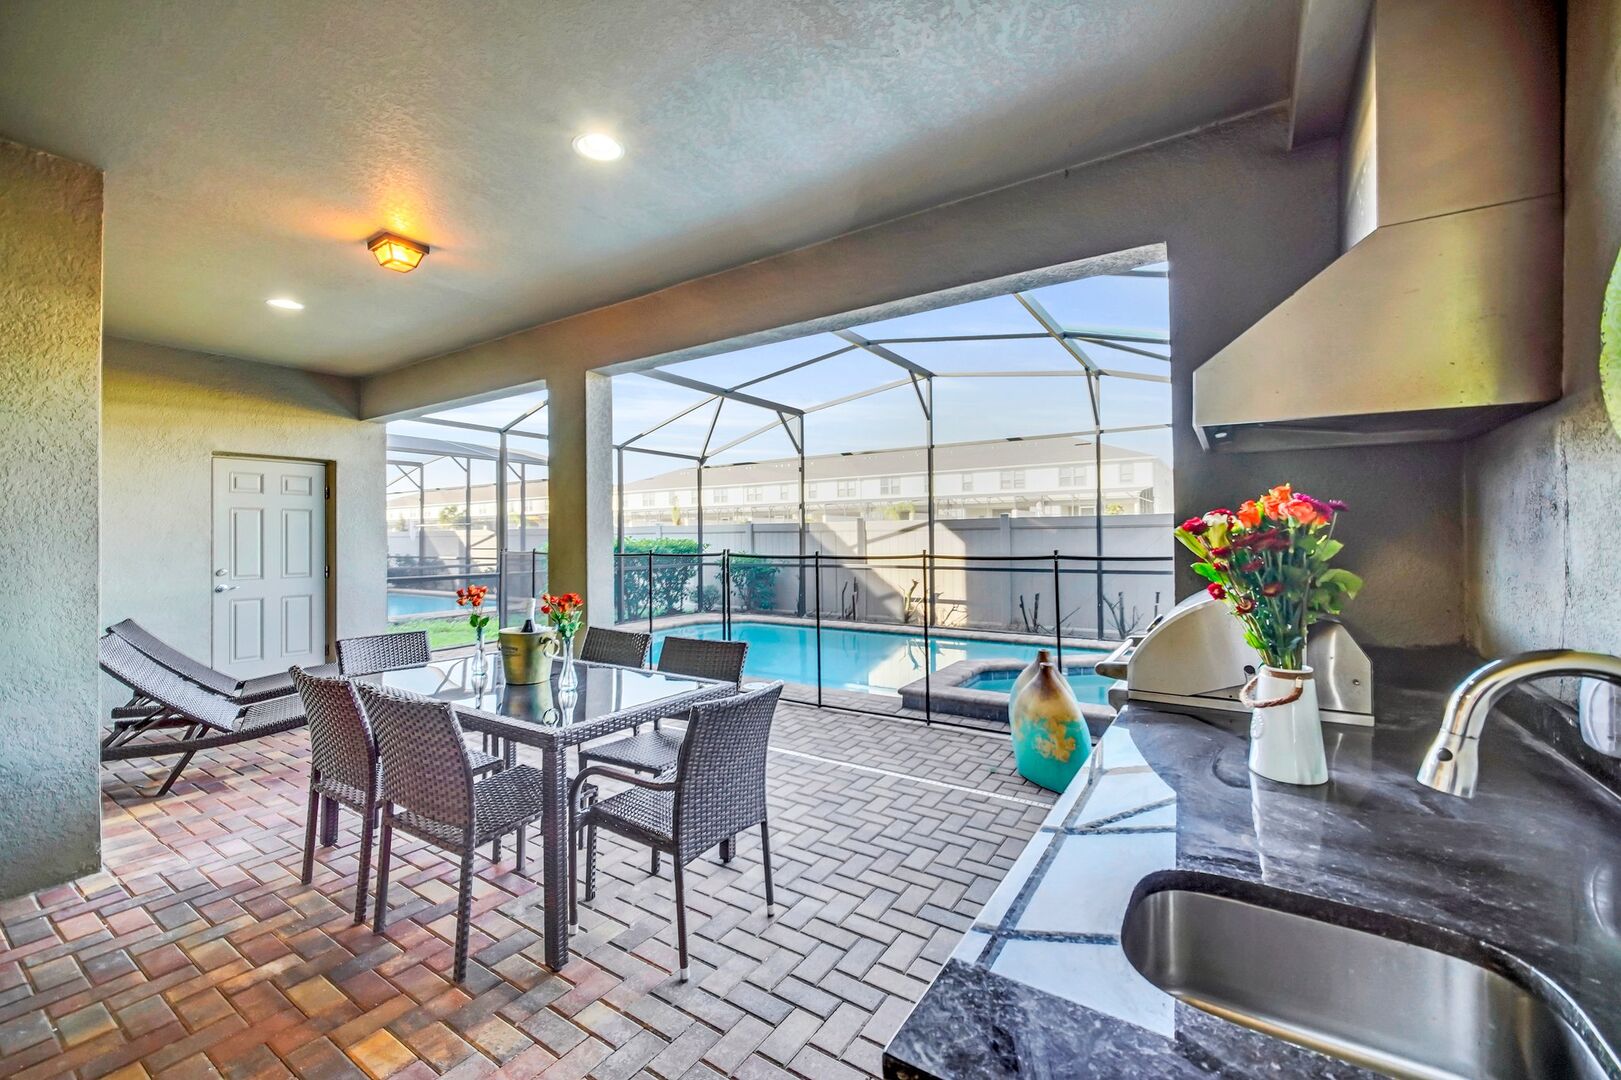 Enjoy a family barbecue or a relaxing time in the private pool!